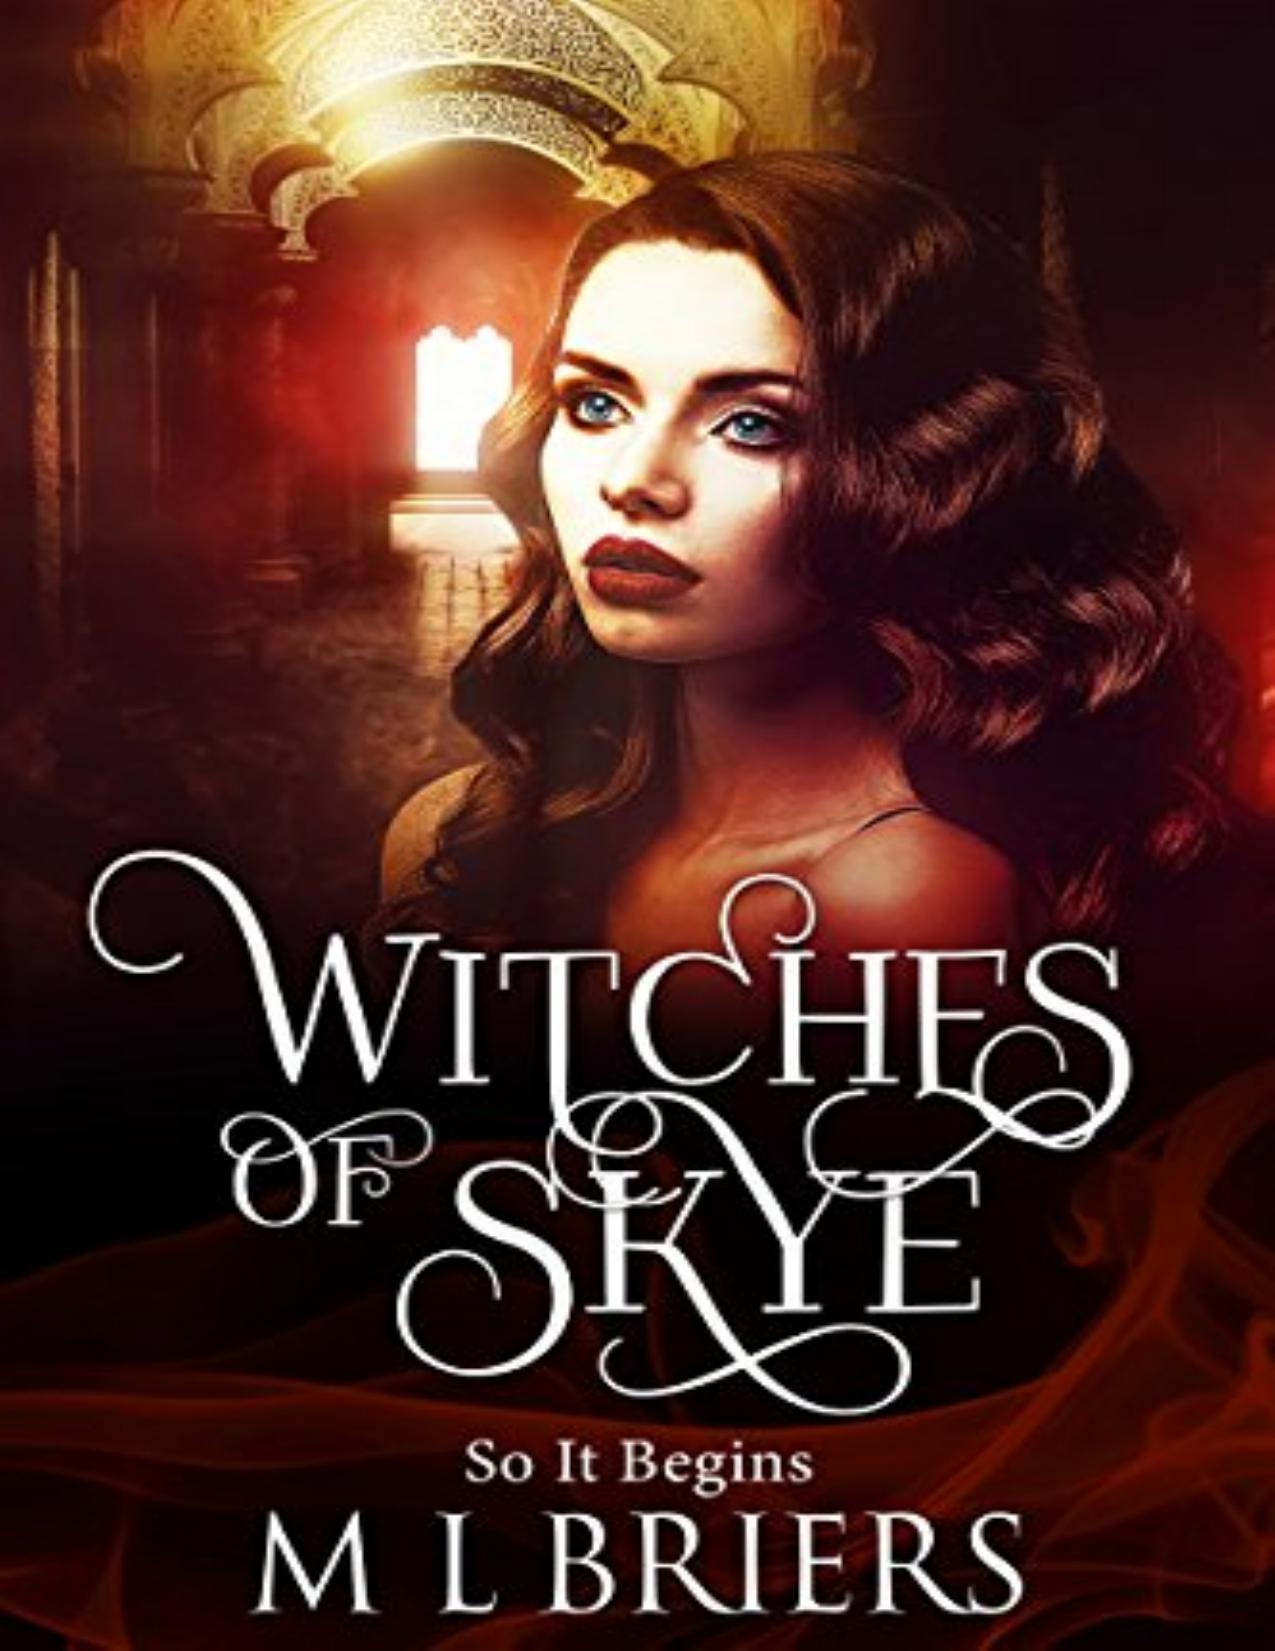 Witches of Skye: So It Begins